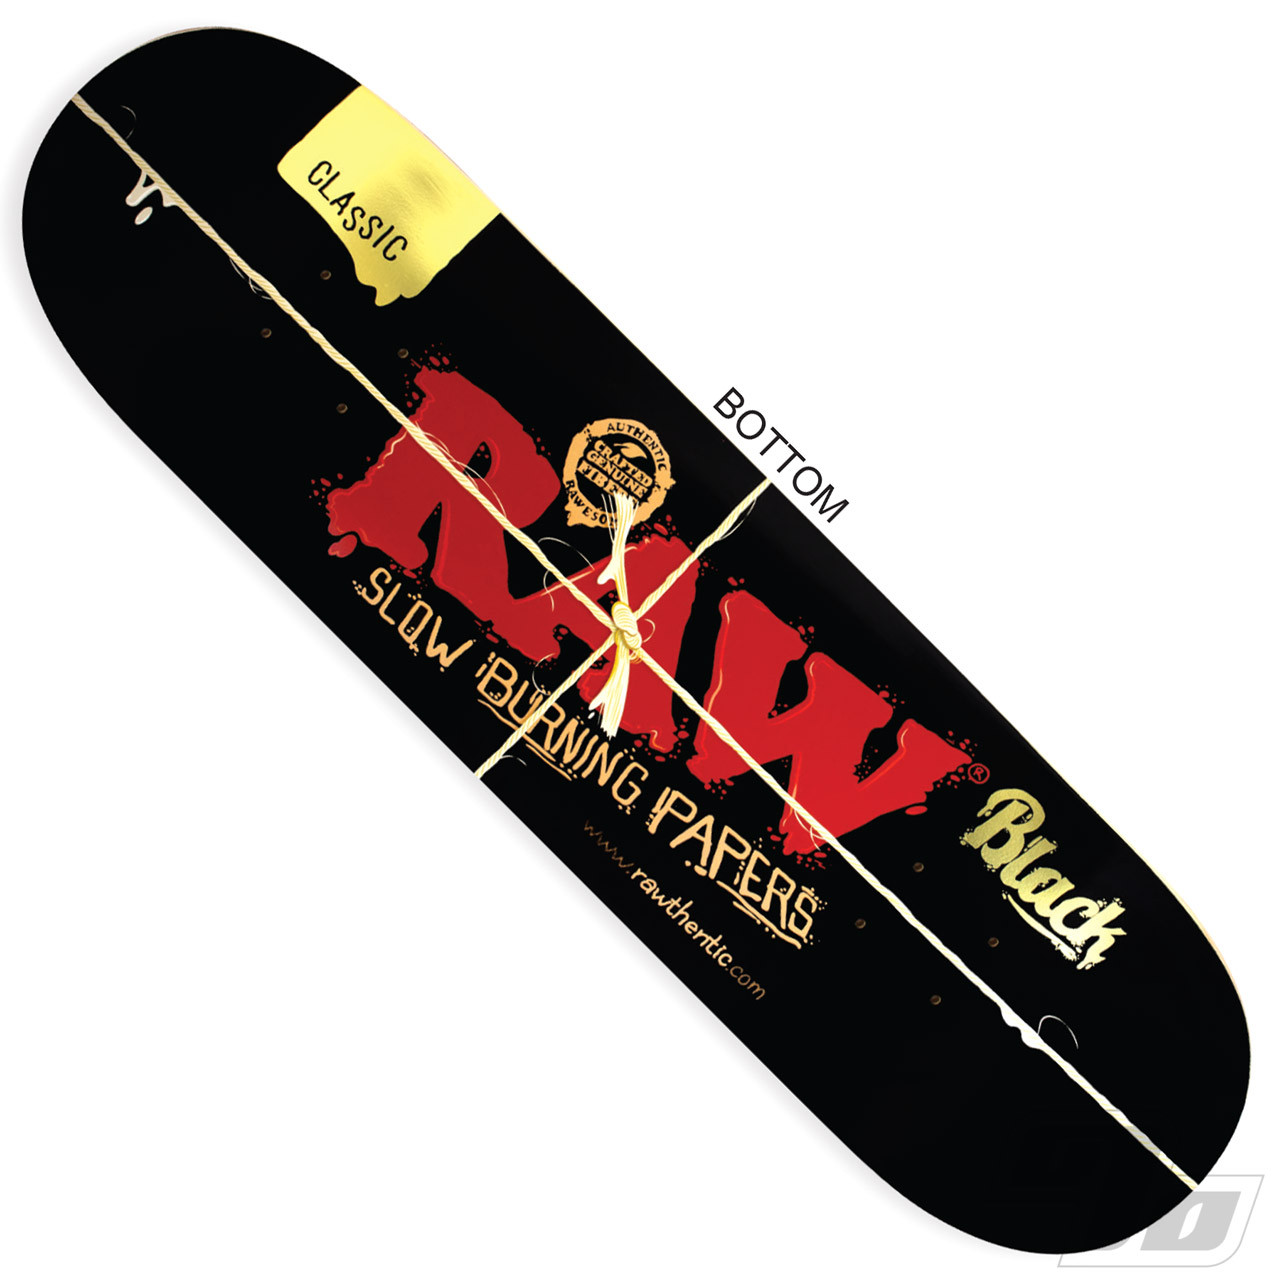 RAW Black Classic Skateboard Deck from RAW Rolling Papers